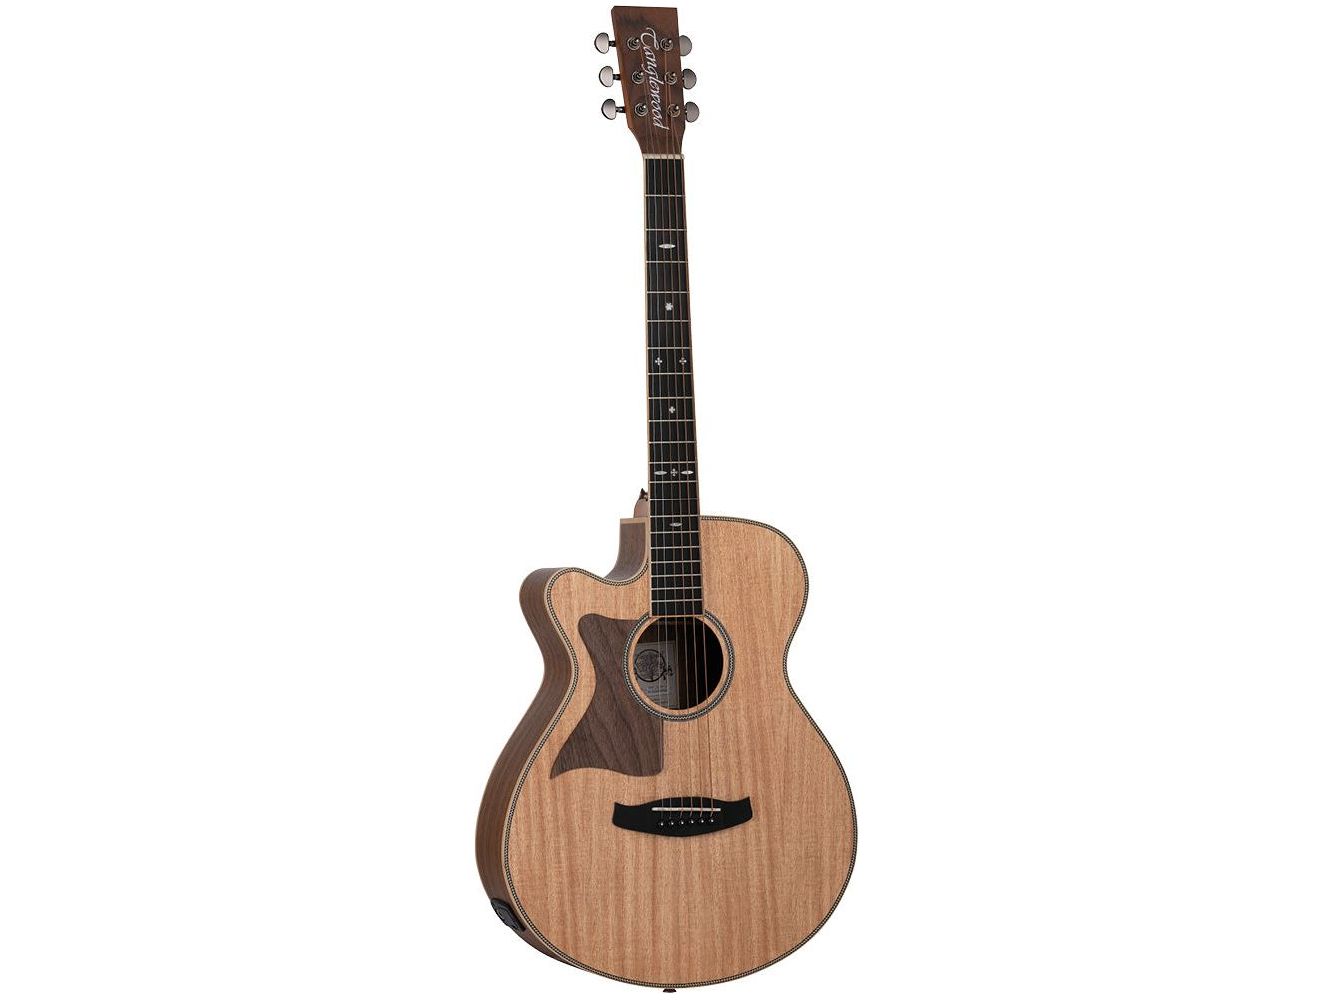 Tanglewood Reunion TRSF CE BW LH 'Super Folk Cutaway' Left Handed Electro Acoustic Guitar